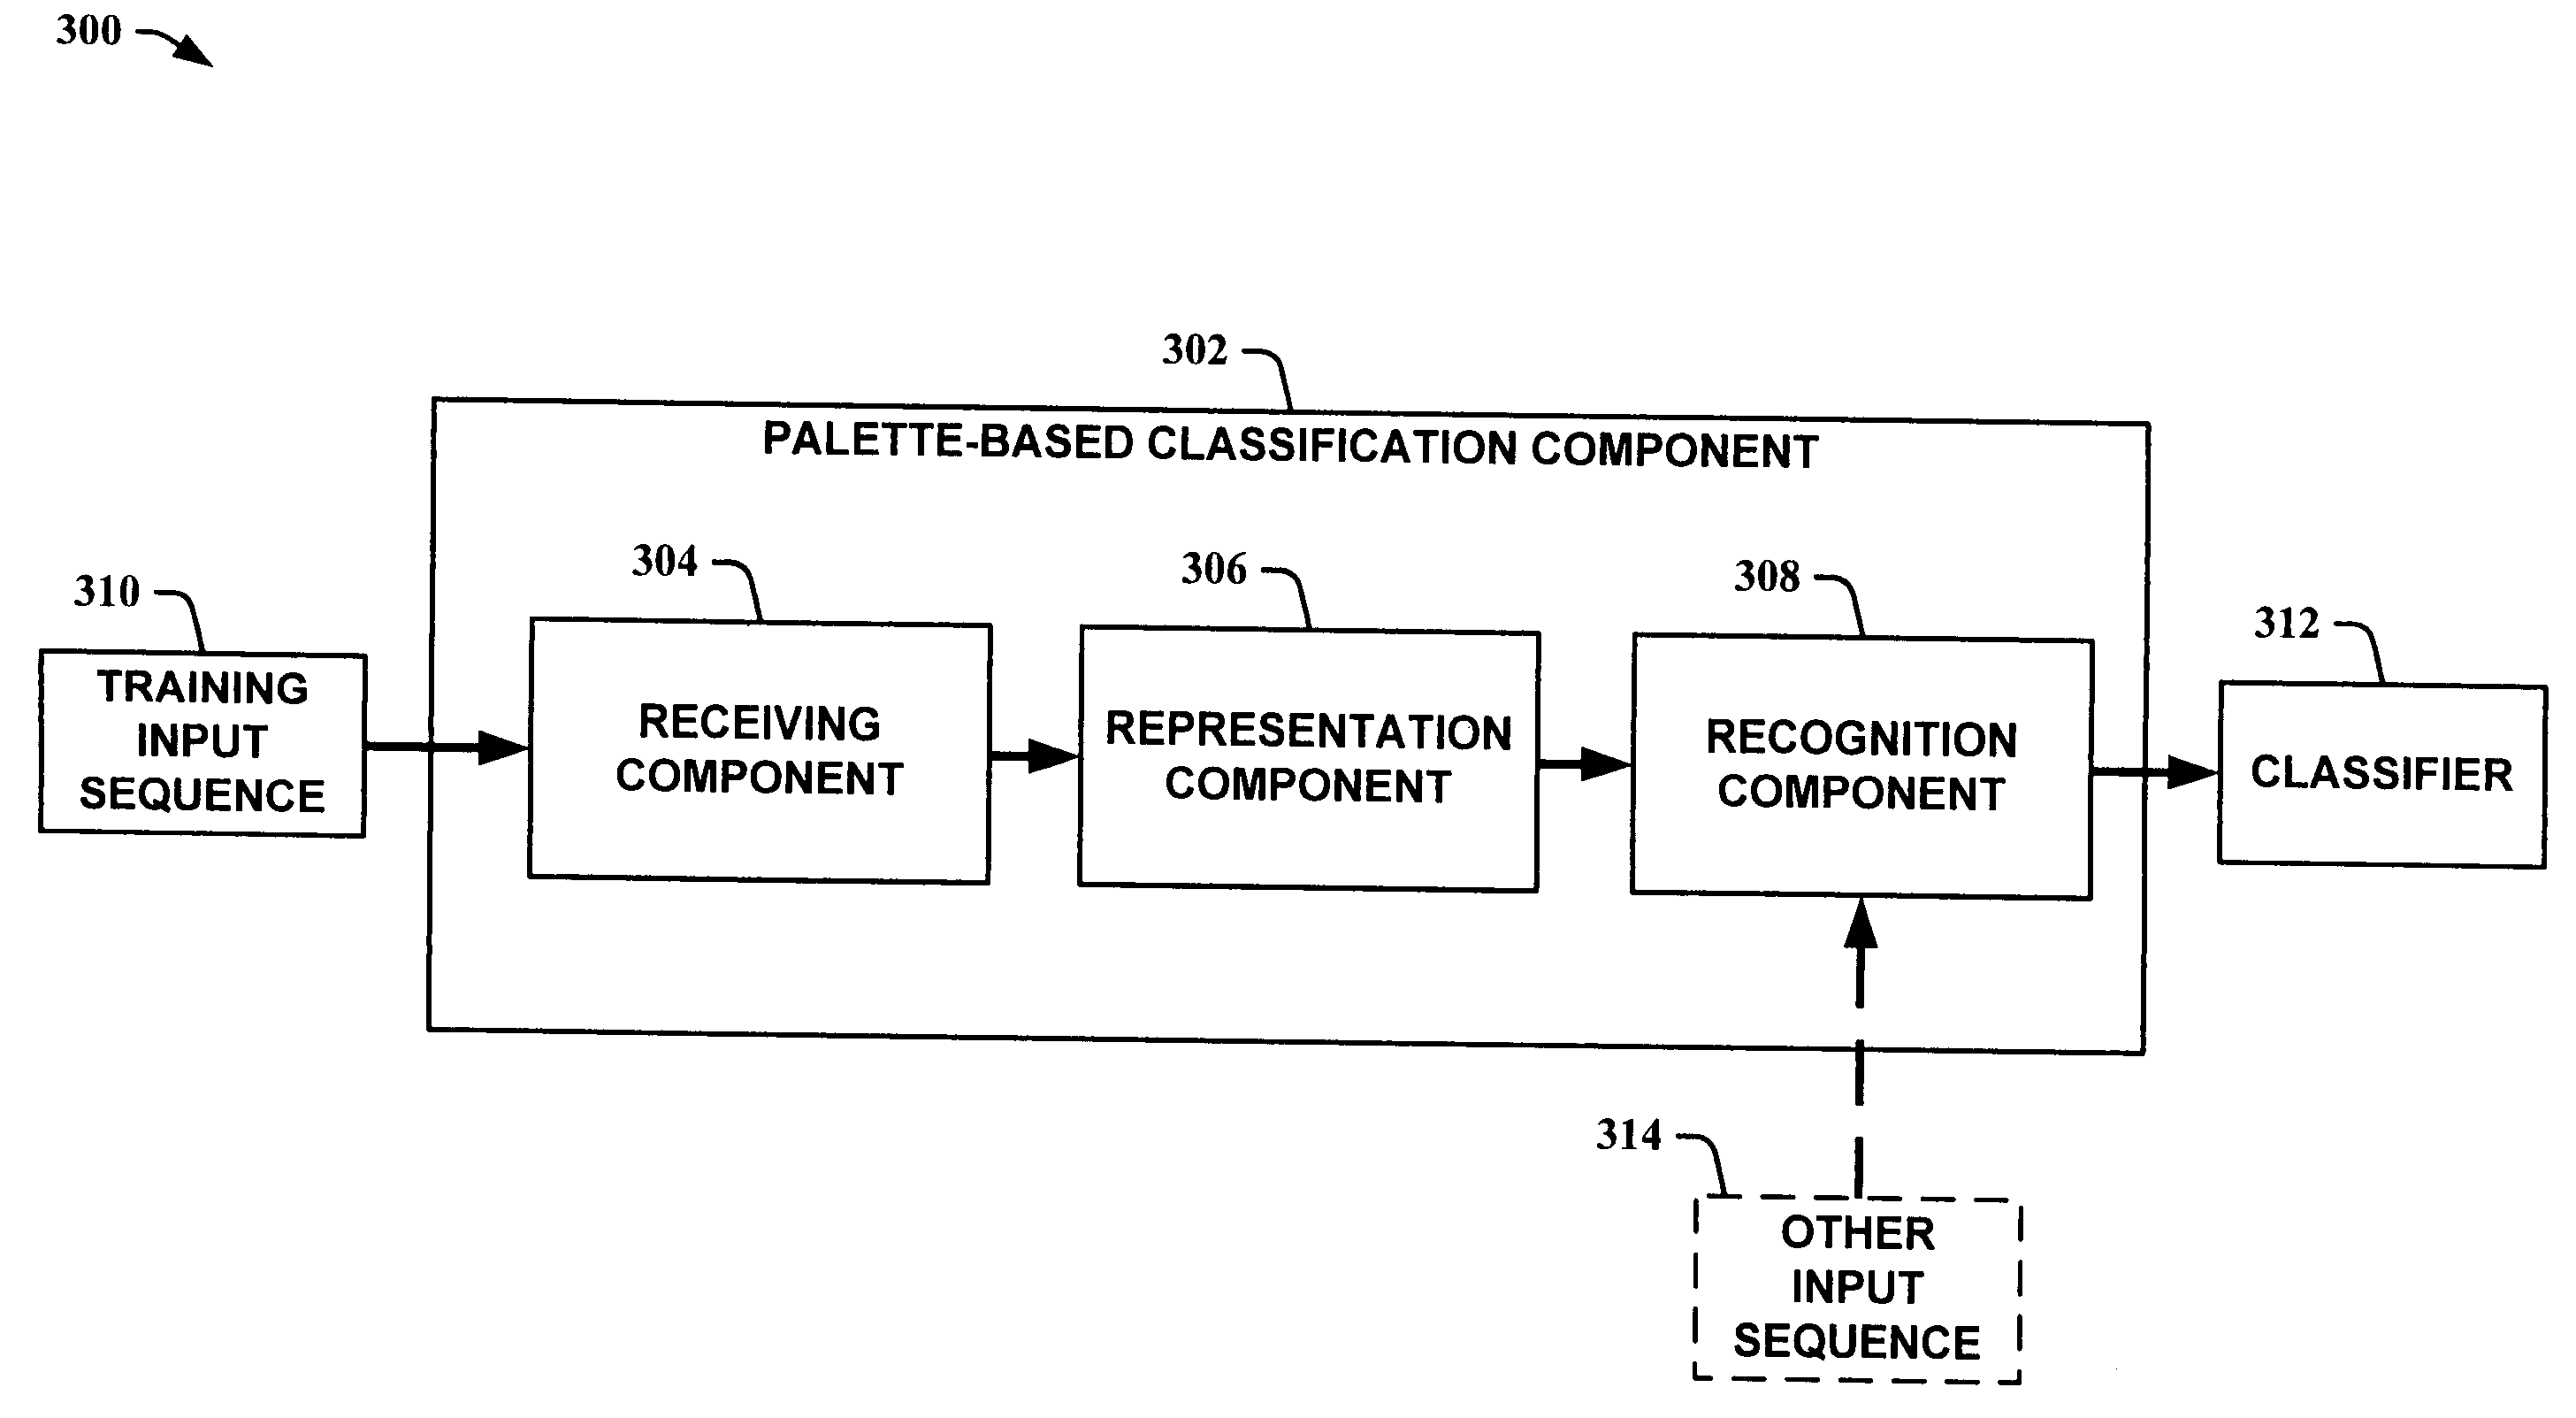 Palette-based classifying and synthesizing of auditory information